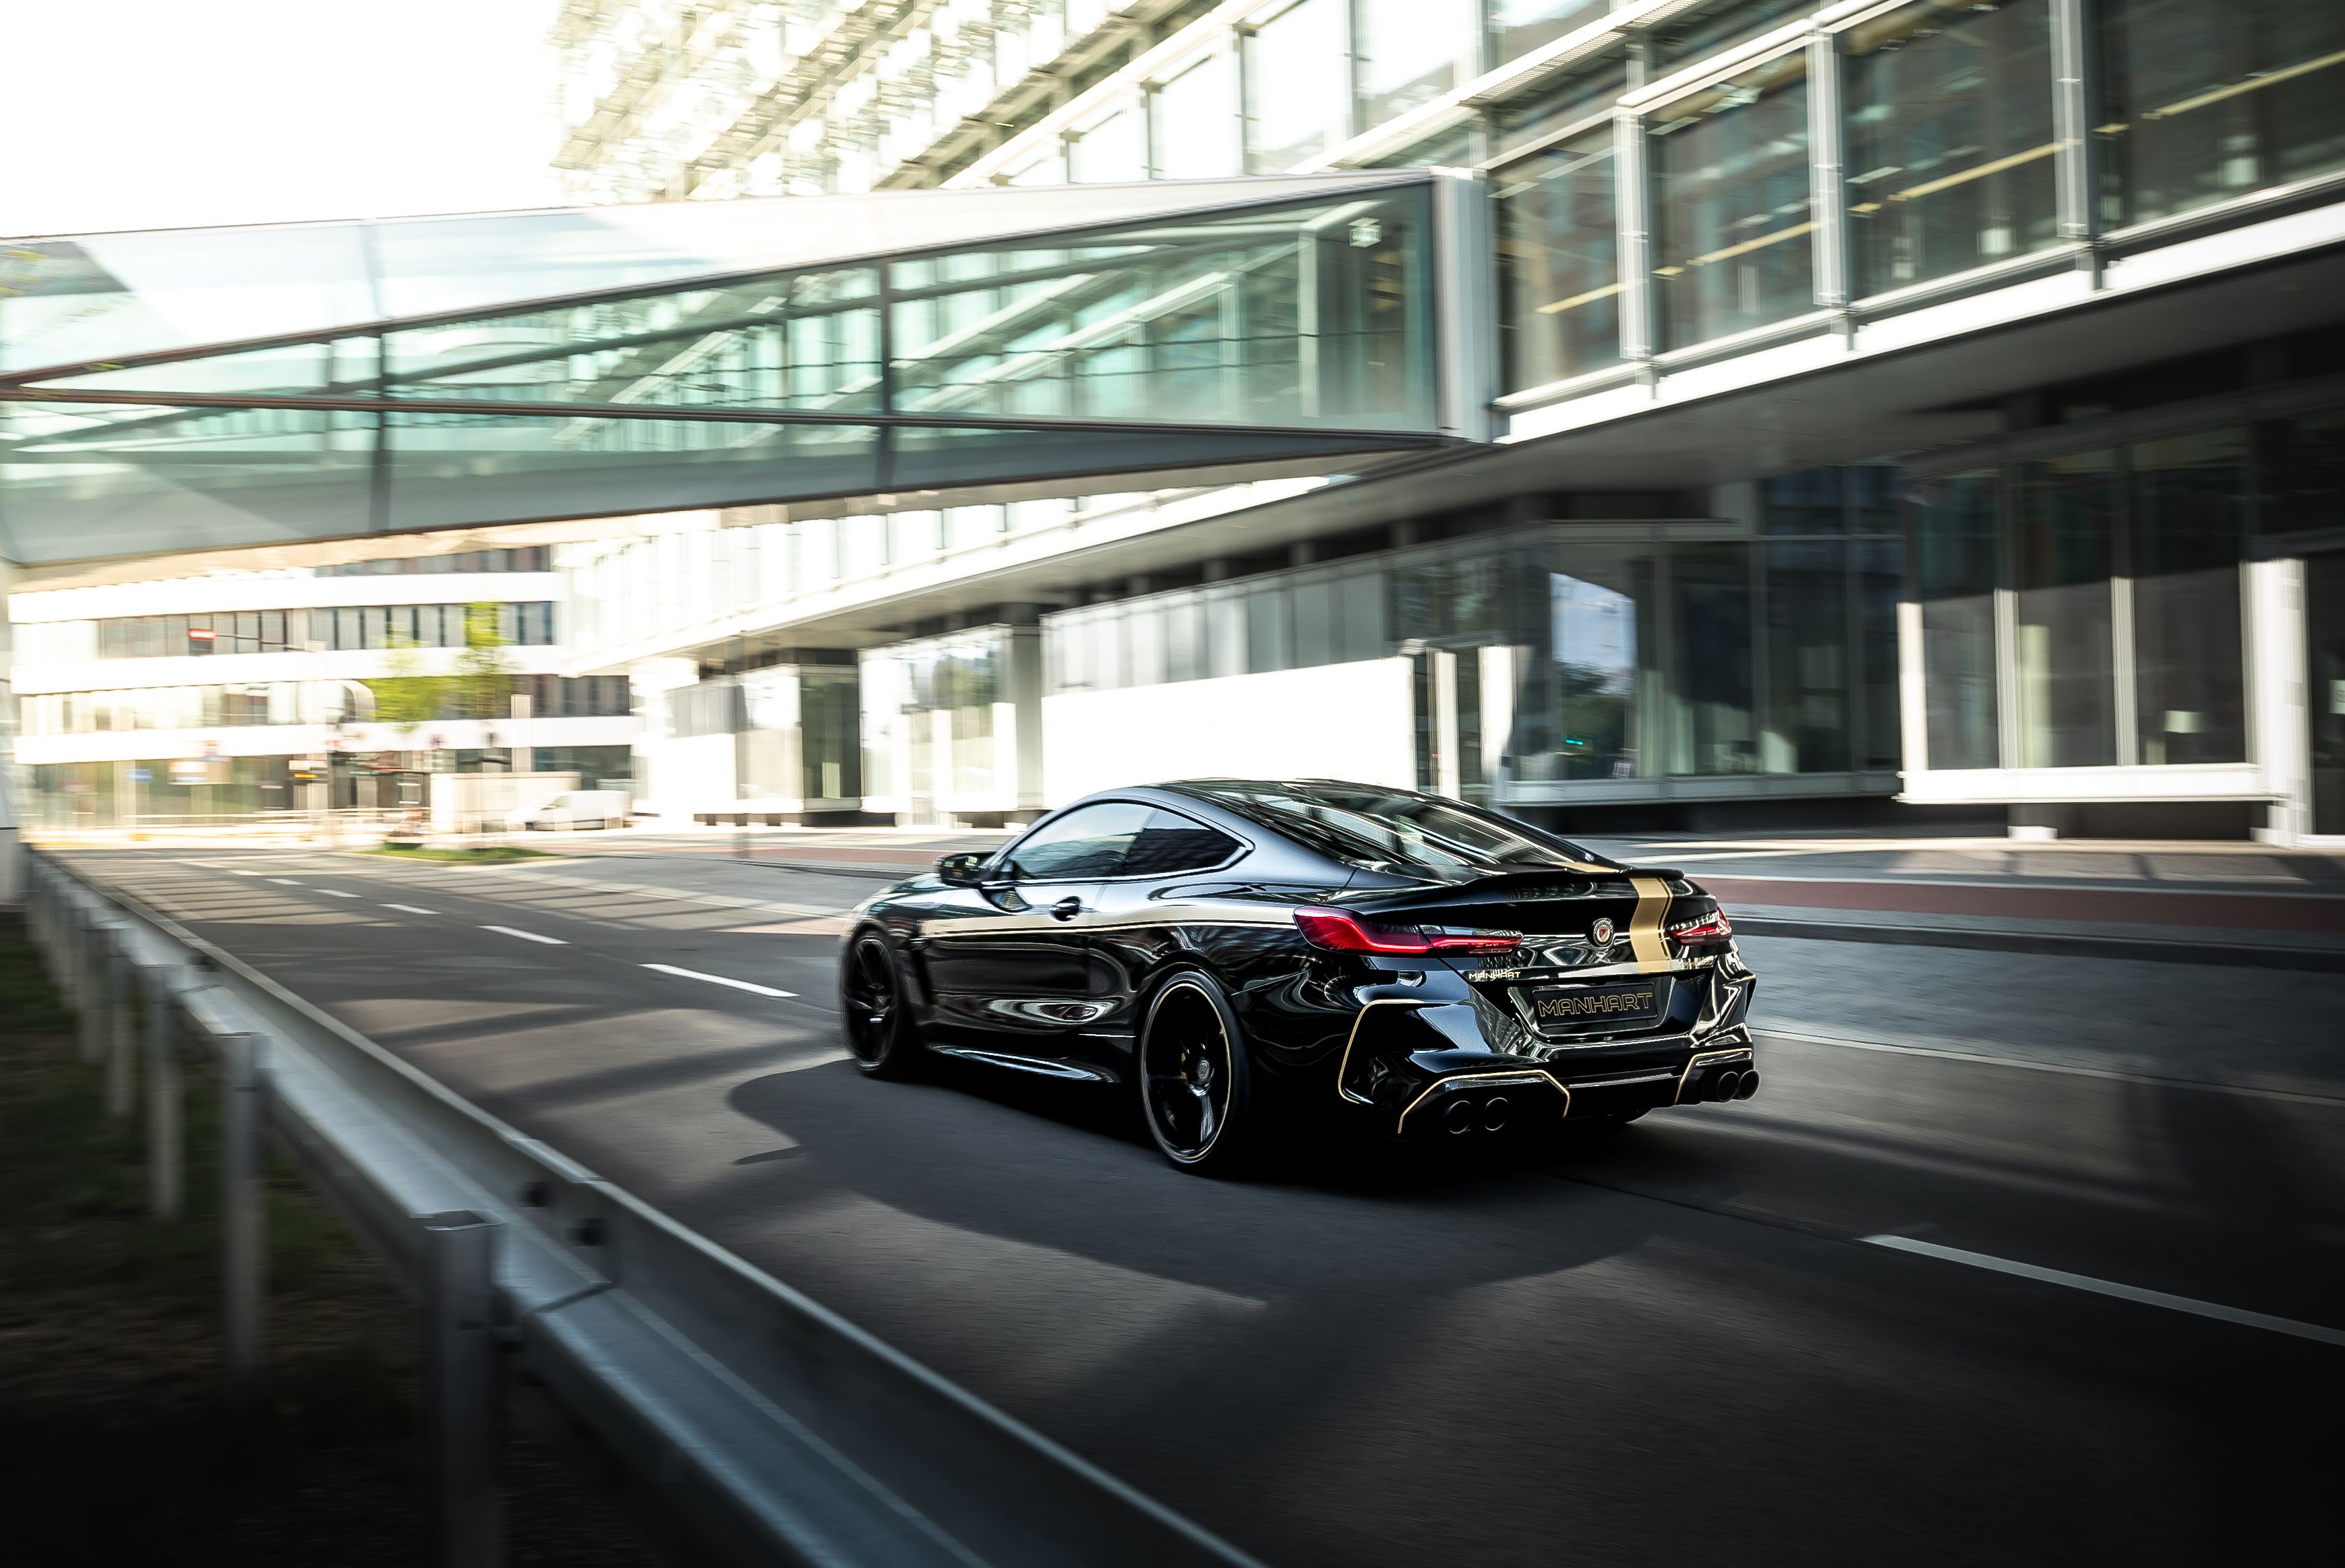 2020 BMW M8 Competition MH8 800 by Manhart - The Fastest 8 Series In the World